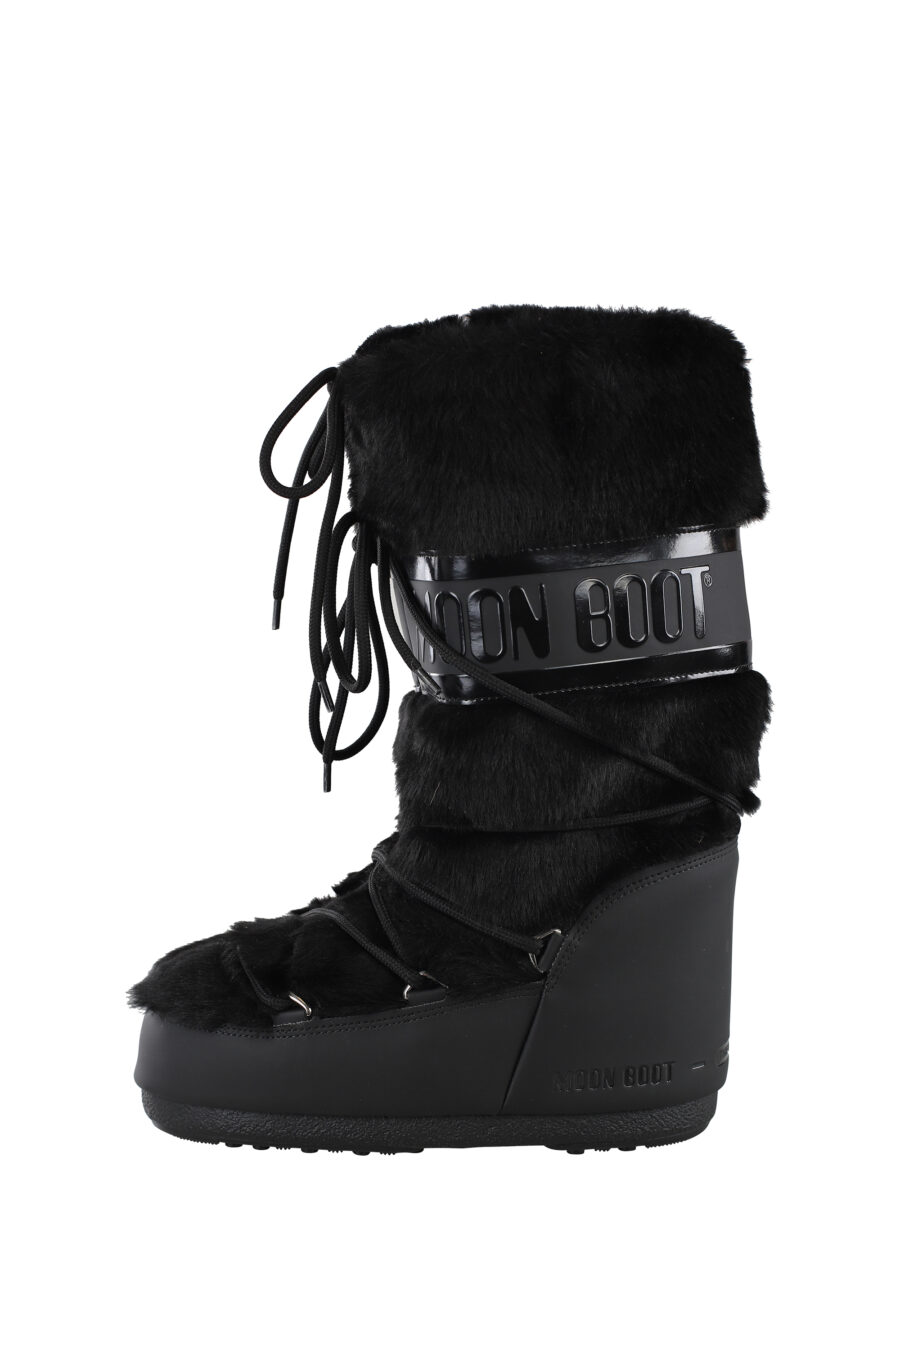 Black snow boots with monochrome logo - IMG 6795